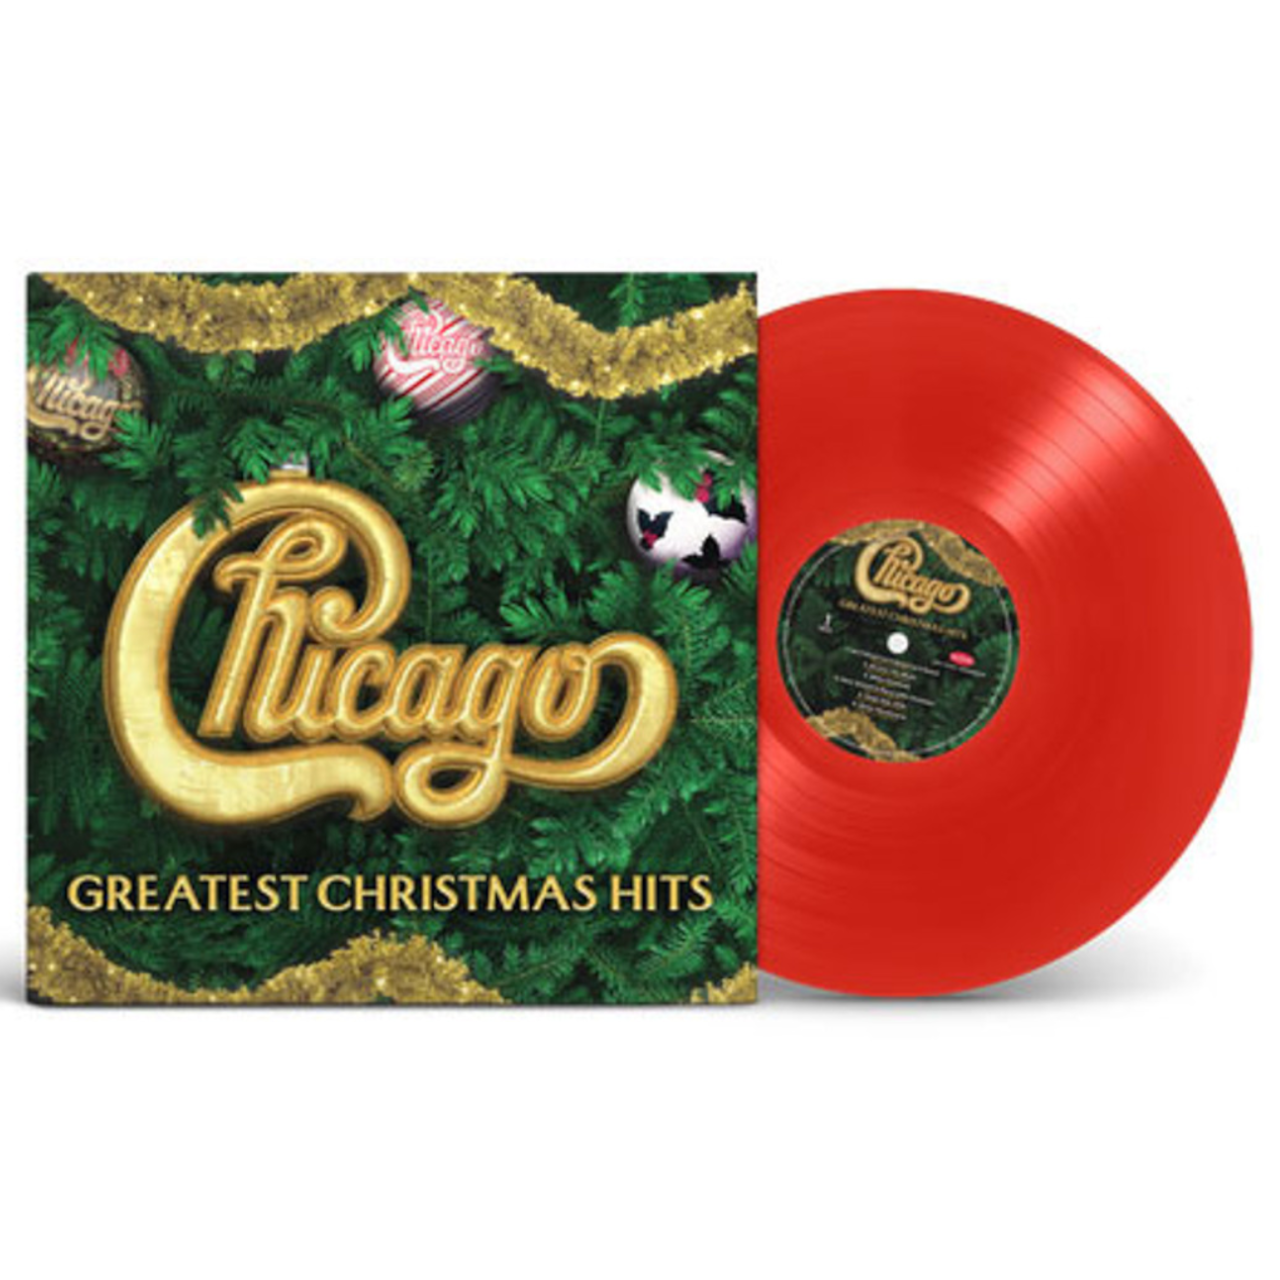 CHICAGO - Greatest Christmas Hits - LP - Red Vinyl